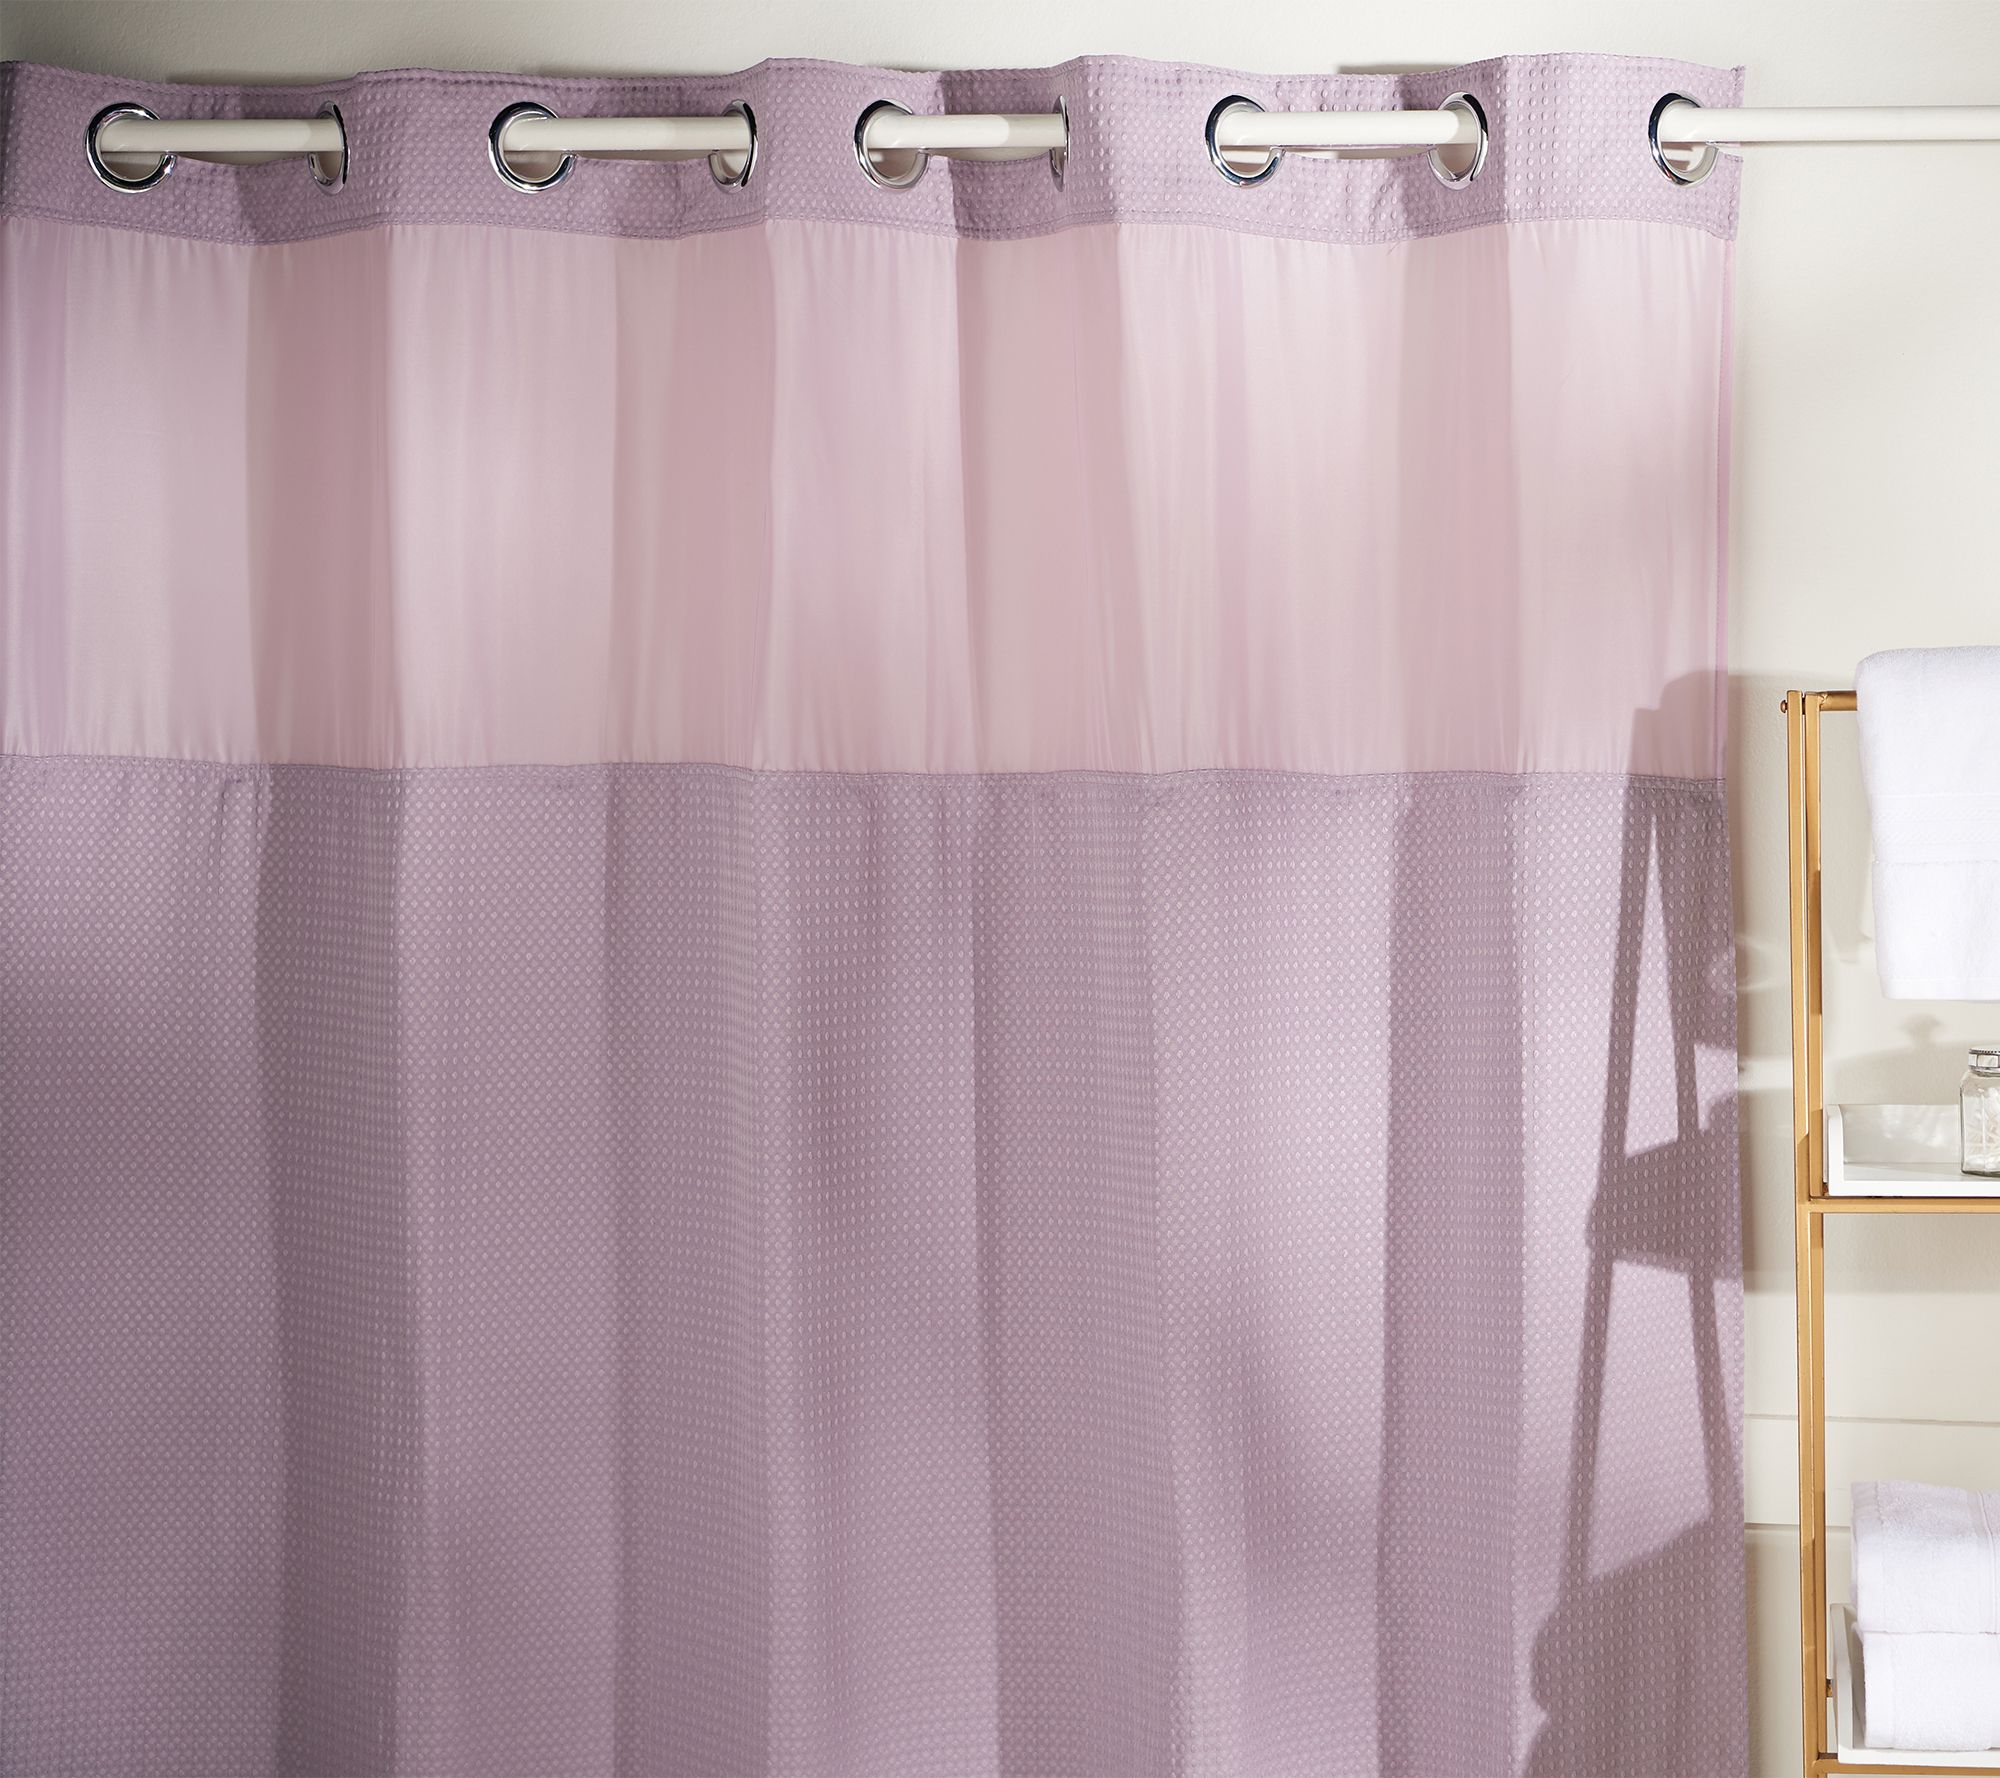 Hookless Waffle Texture Shower Curtain, How To Install Hookless Shower Curtain